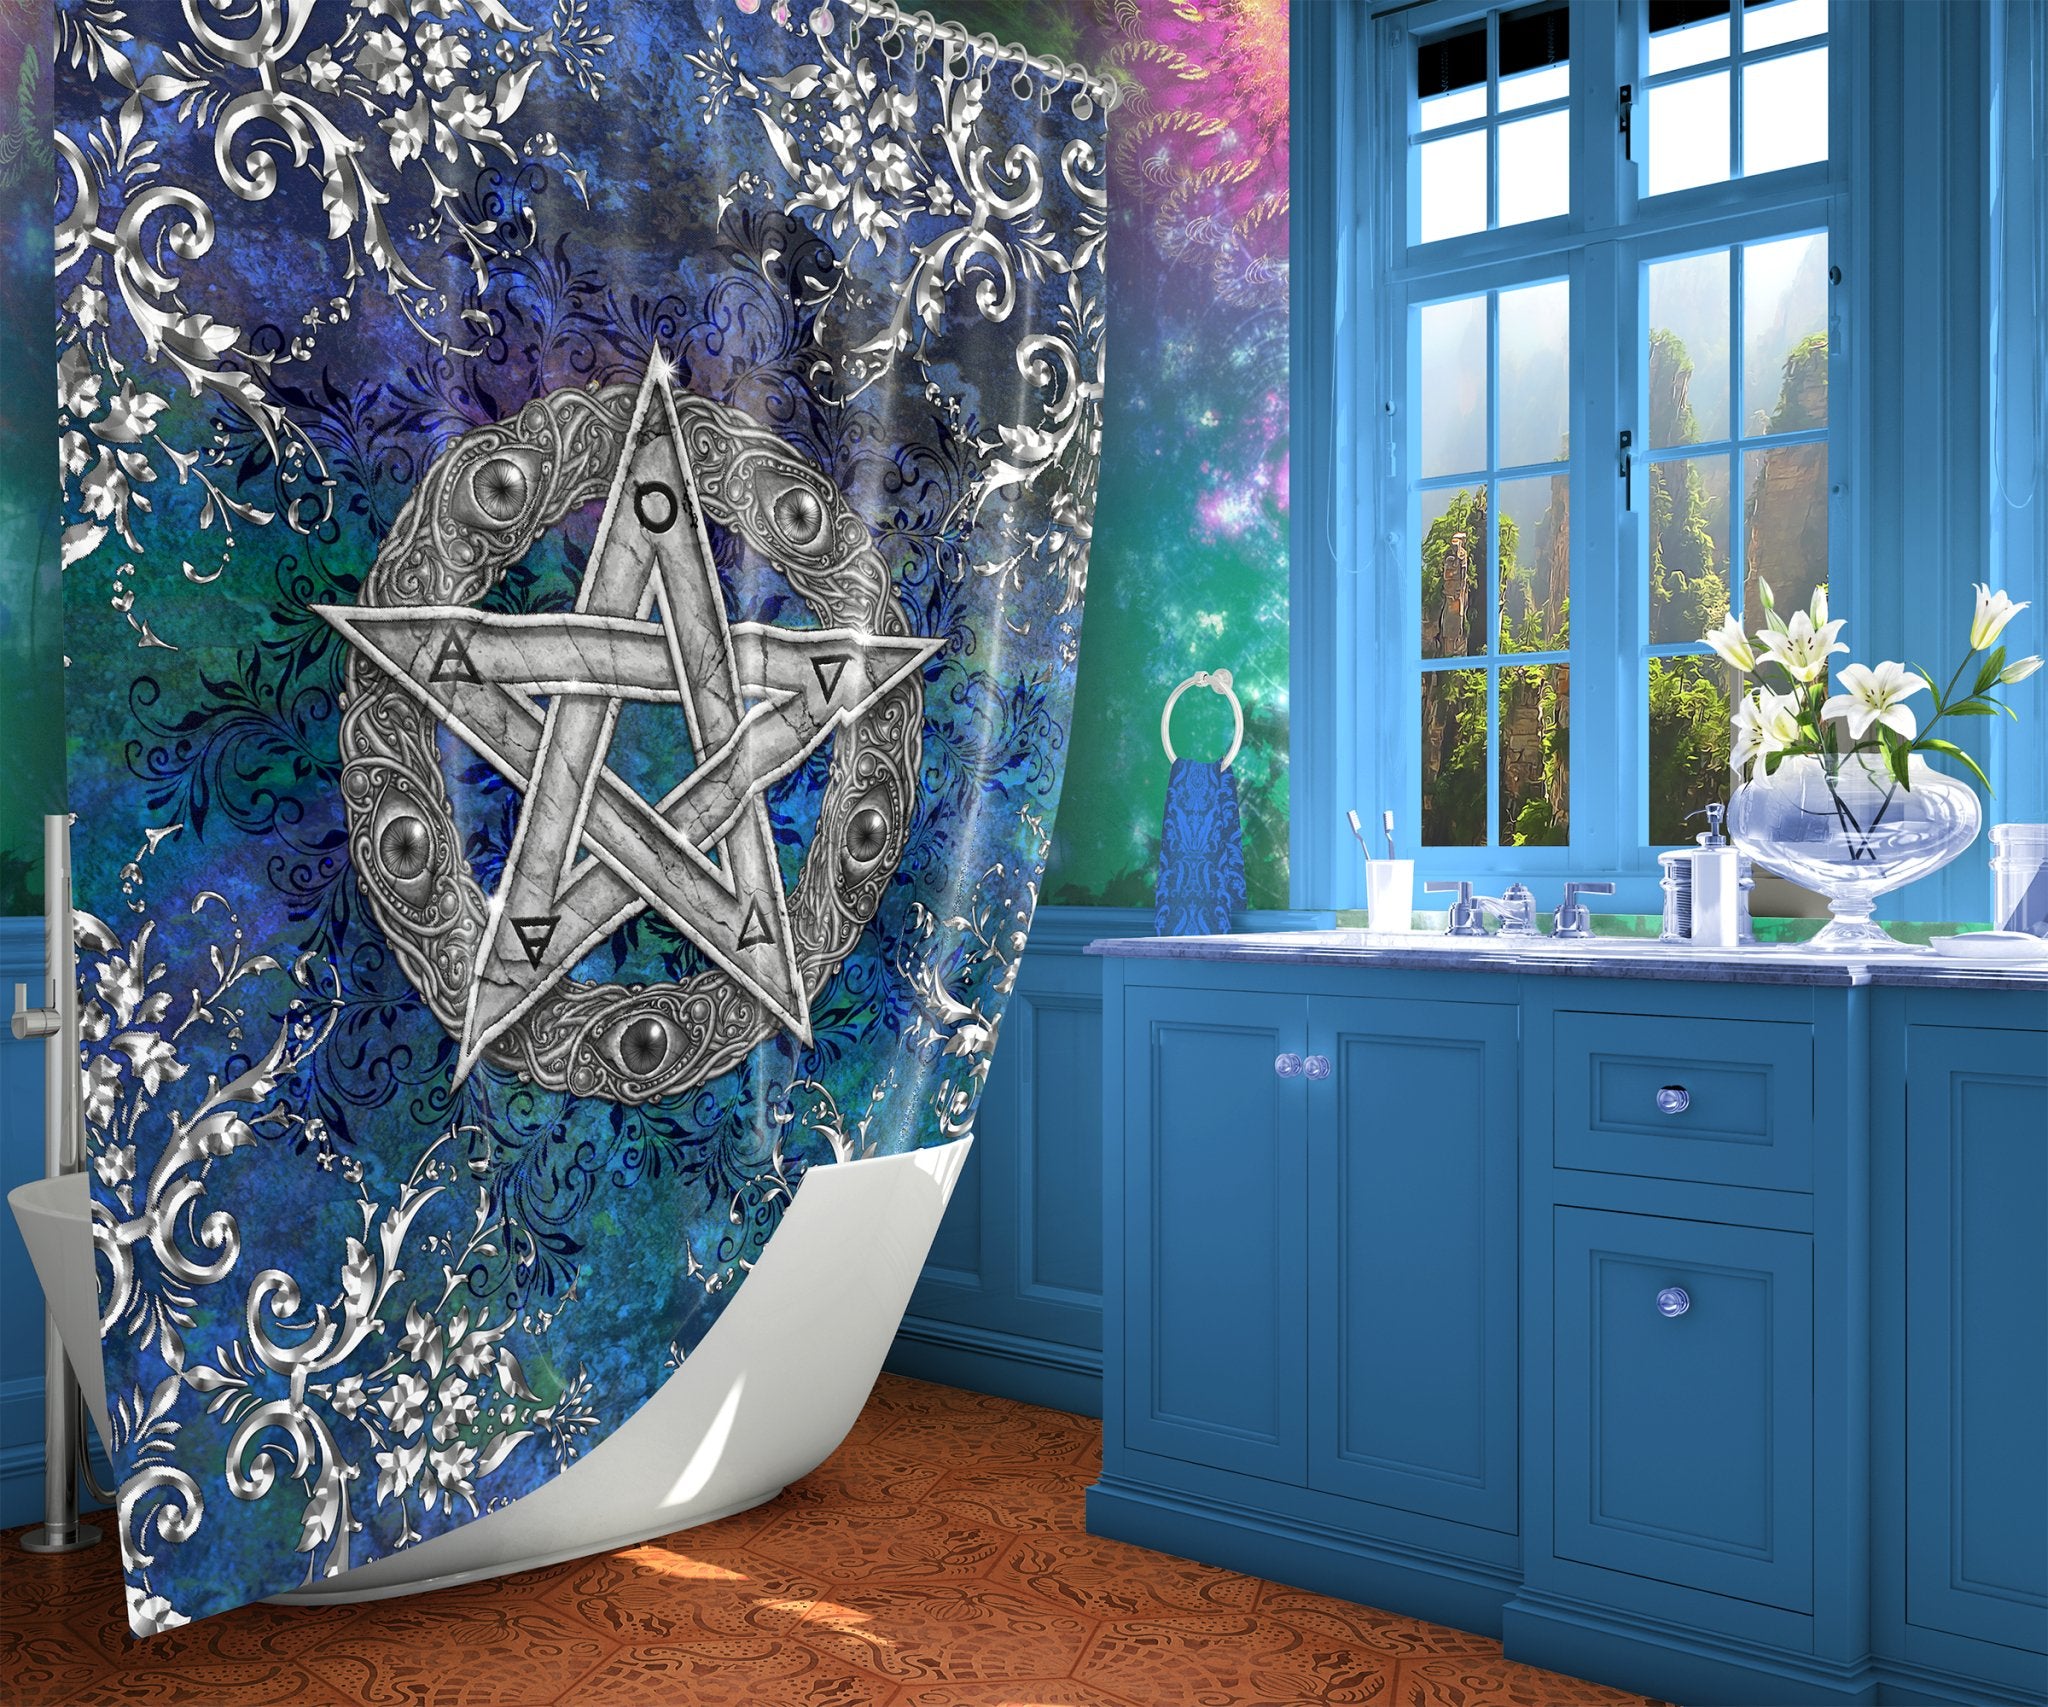 Wicca Pentacle Shower Curtain, 71x74 inches, Witch Bathroom Decor, Pagan Art, Eclectic and Witchy Home Art - Gold and Silver (Legacy) 2 Colors + Other Variants - Abysm Internal